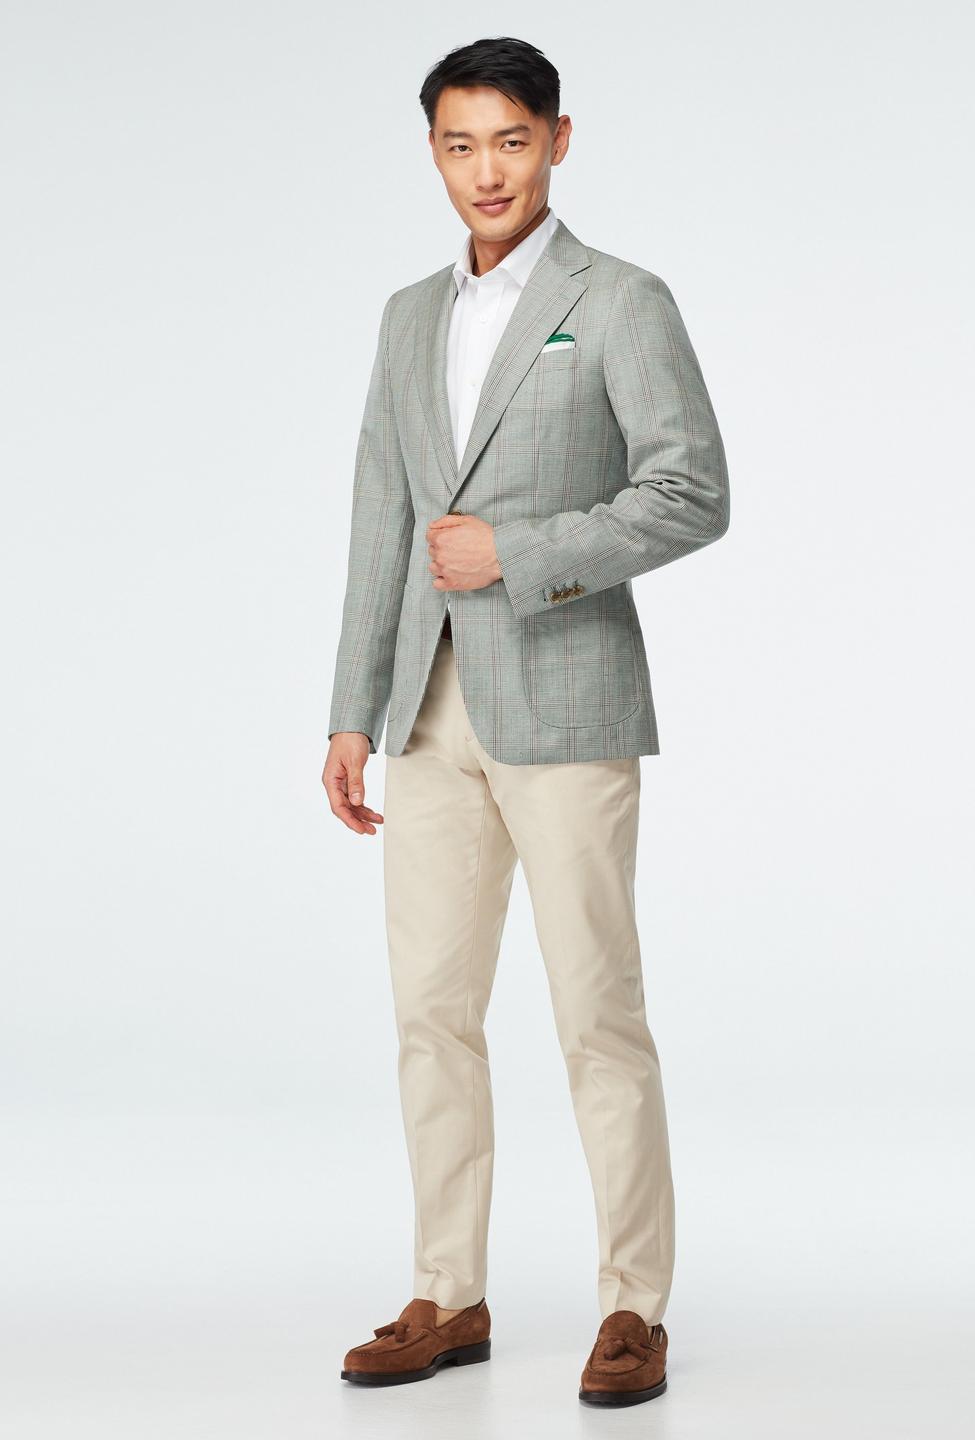 Green blazer - Southport Houndstooth Design from Seasonal Indochino Collection